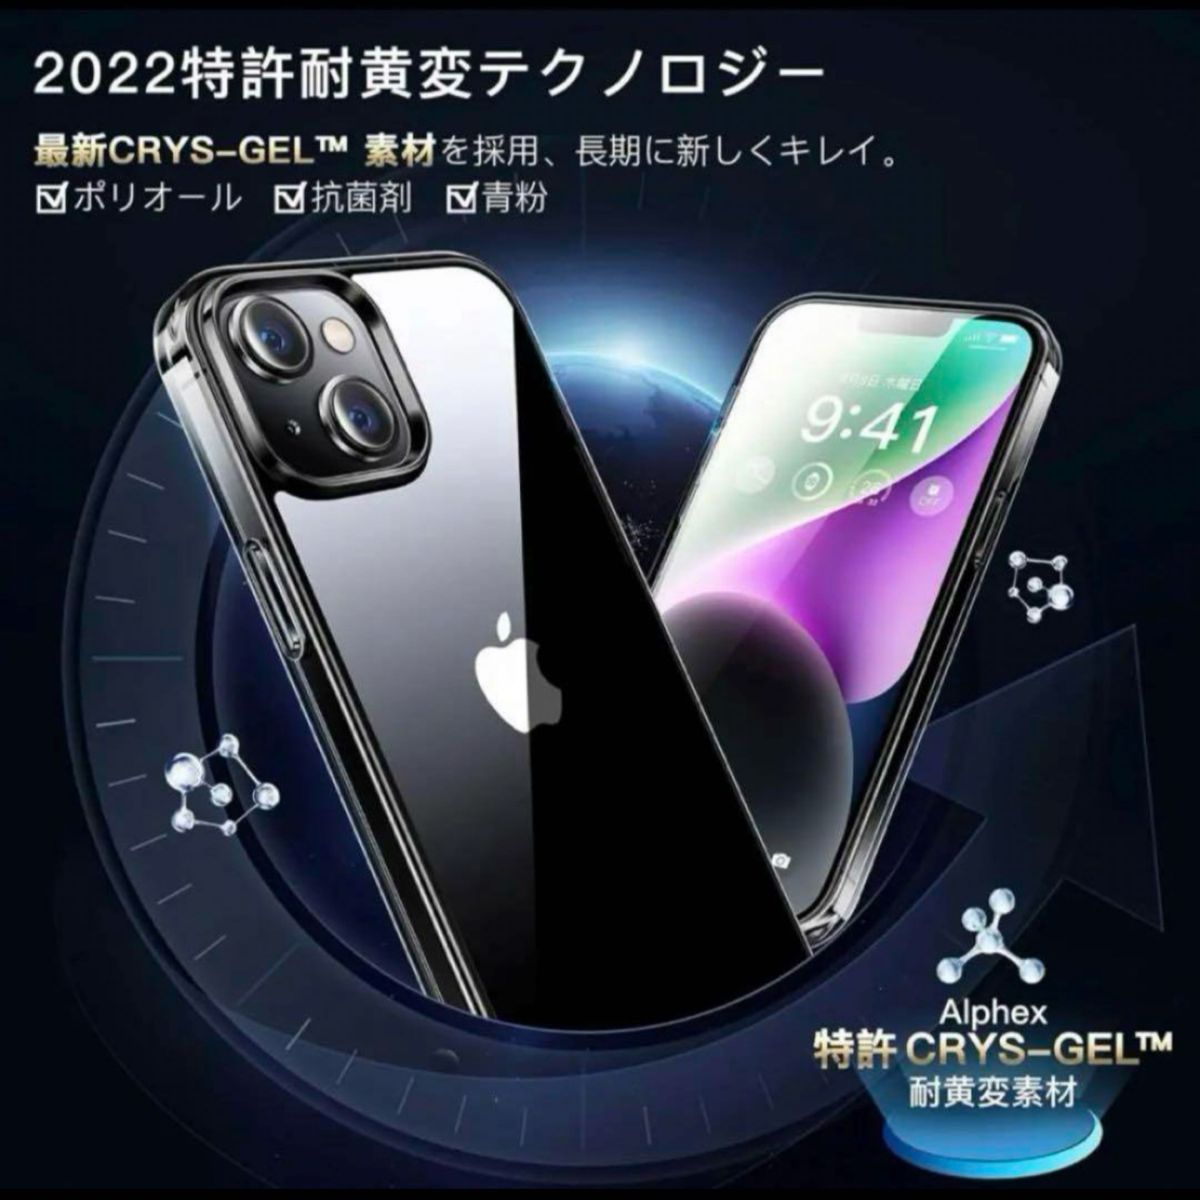 iPhone 14 promax 用 フィルム付きケース 全面保護